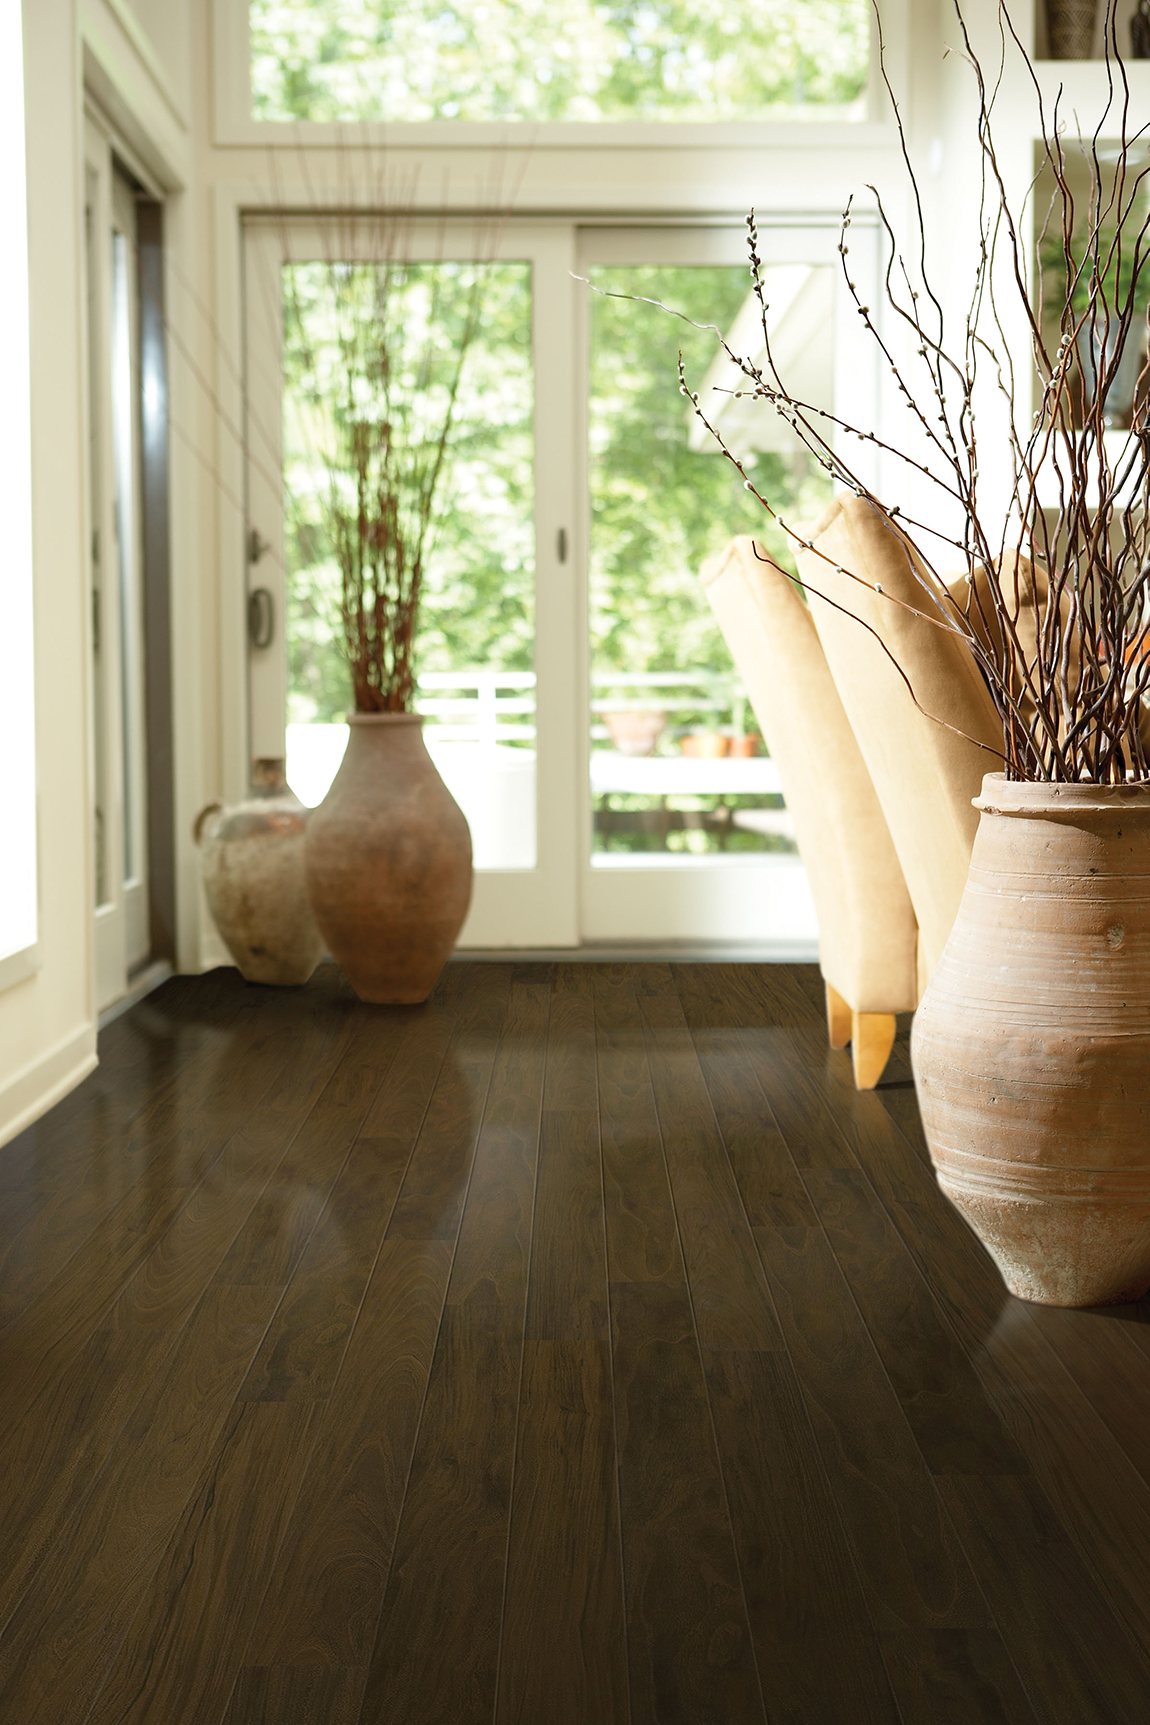 Floor Trader Wood-Look Laminate Sample in hallway featuring vases and pottery